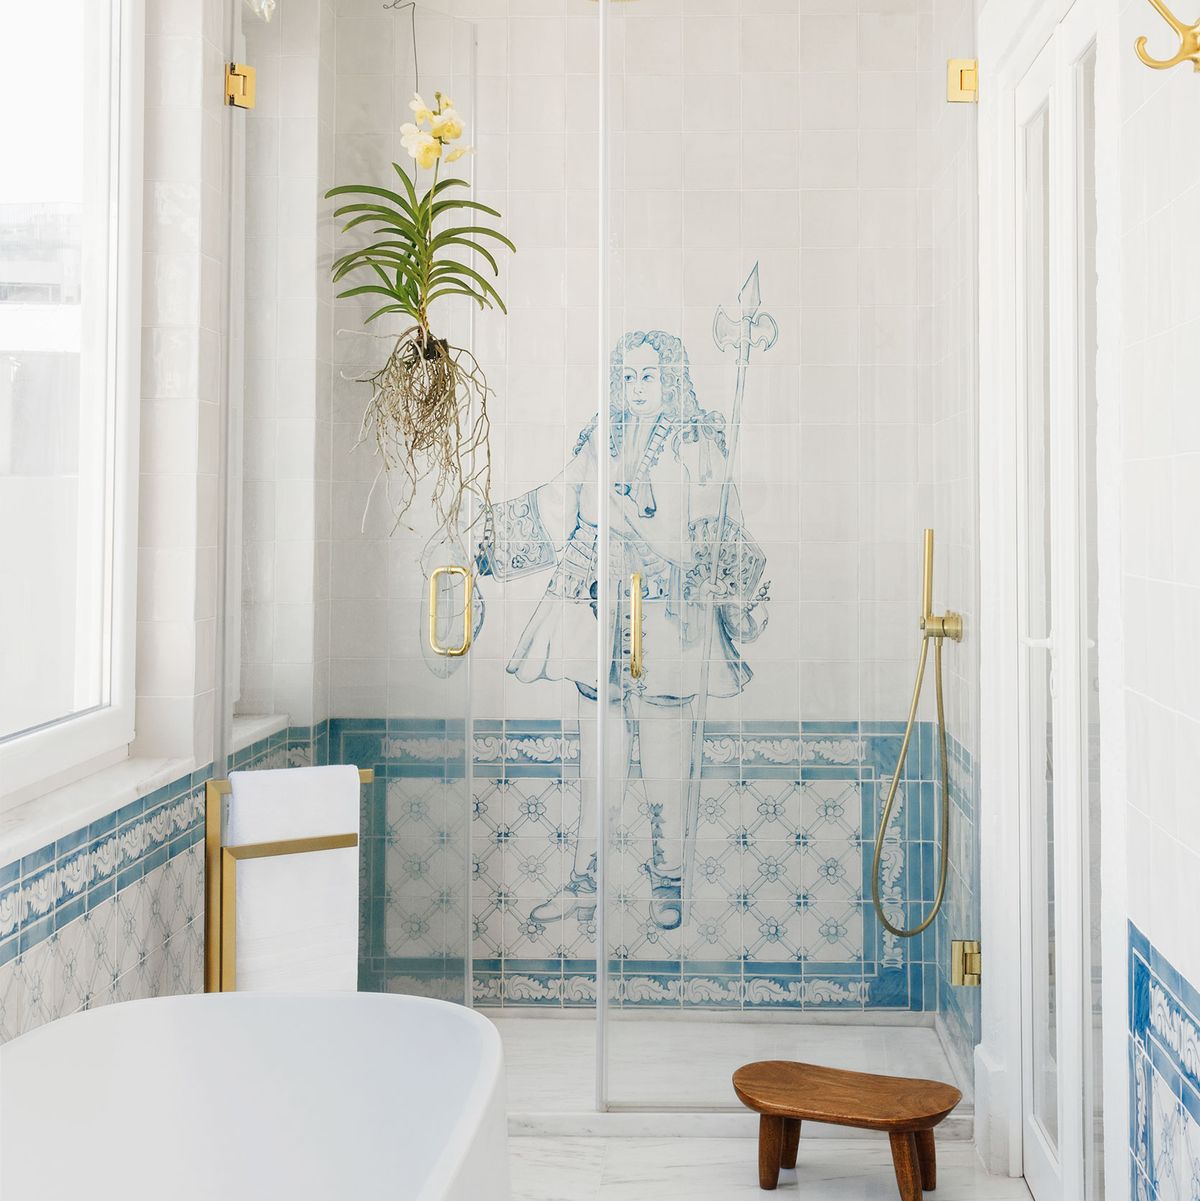 the main bathroom has a marble floor, deep bathtub, a small wooden stool, and in the glass doored shower, an image of an 18th century man with a staff and waistcoat is done in blue and white tiles